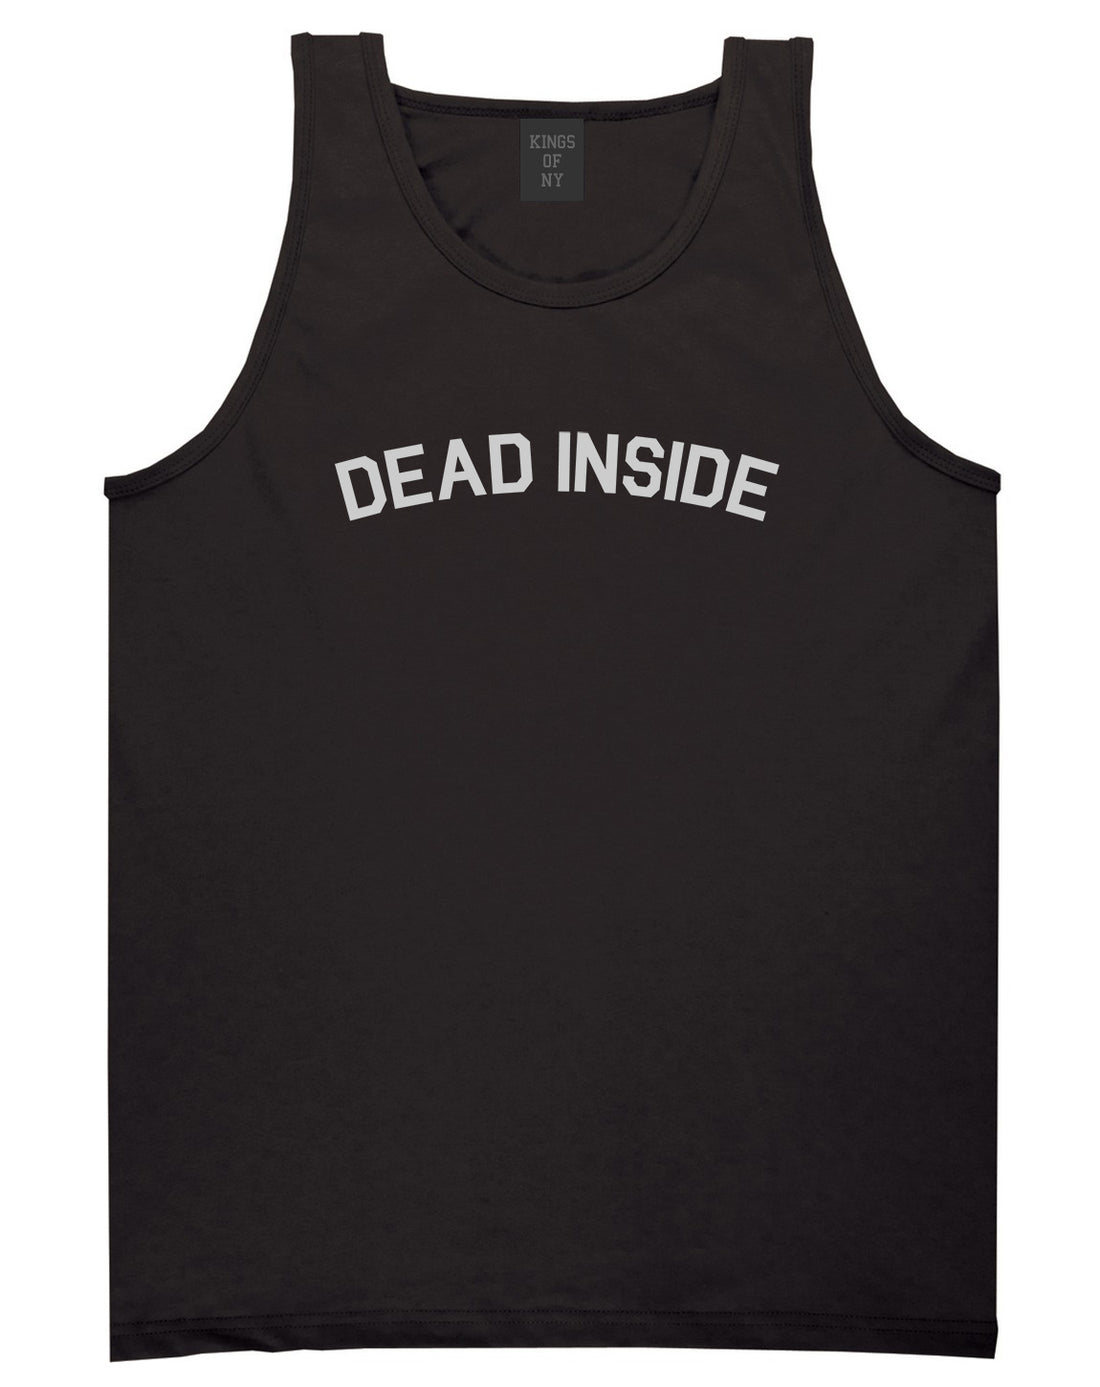 Dead Inside Arch Mens Tank Top Shirt Black by Kings Of NY